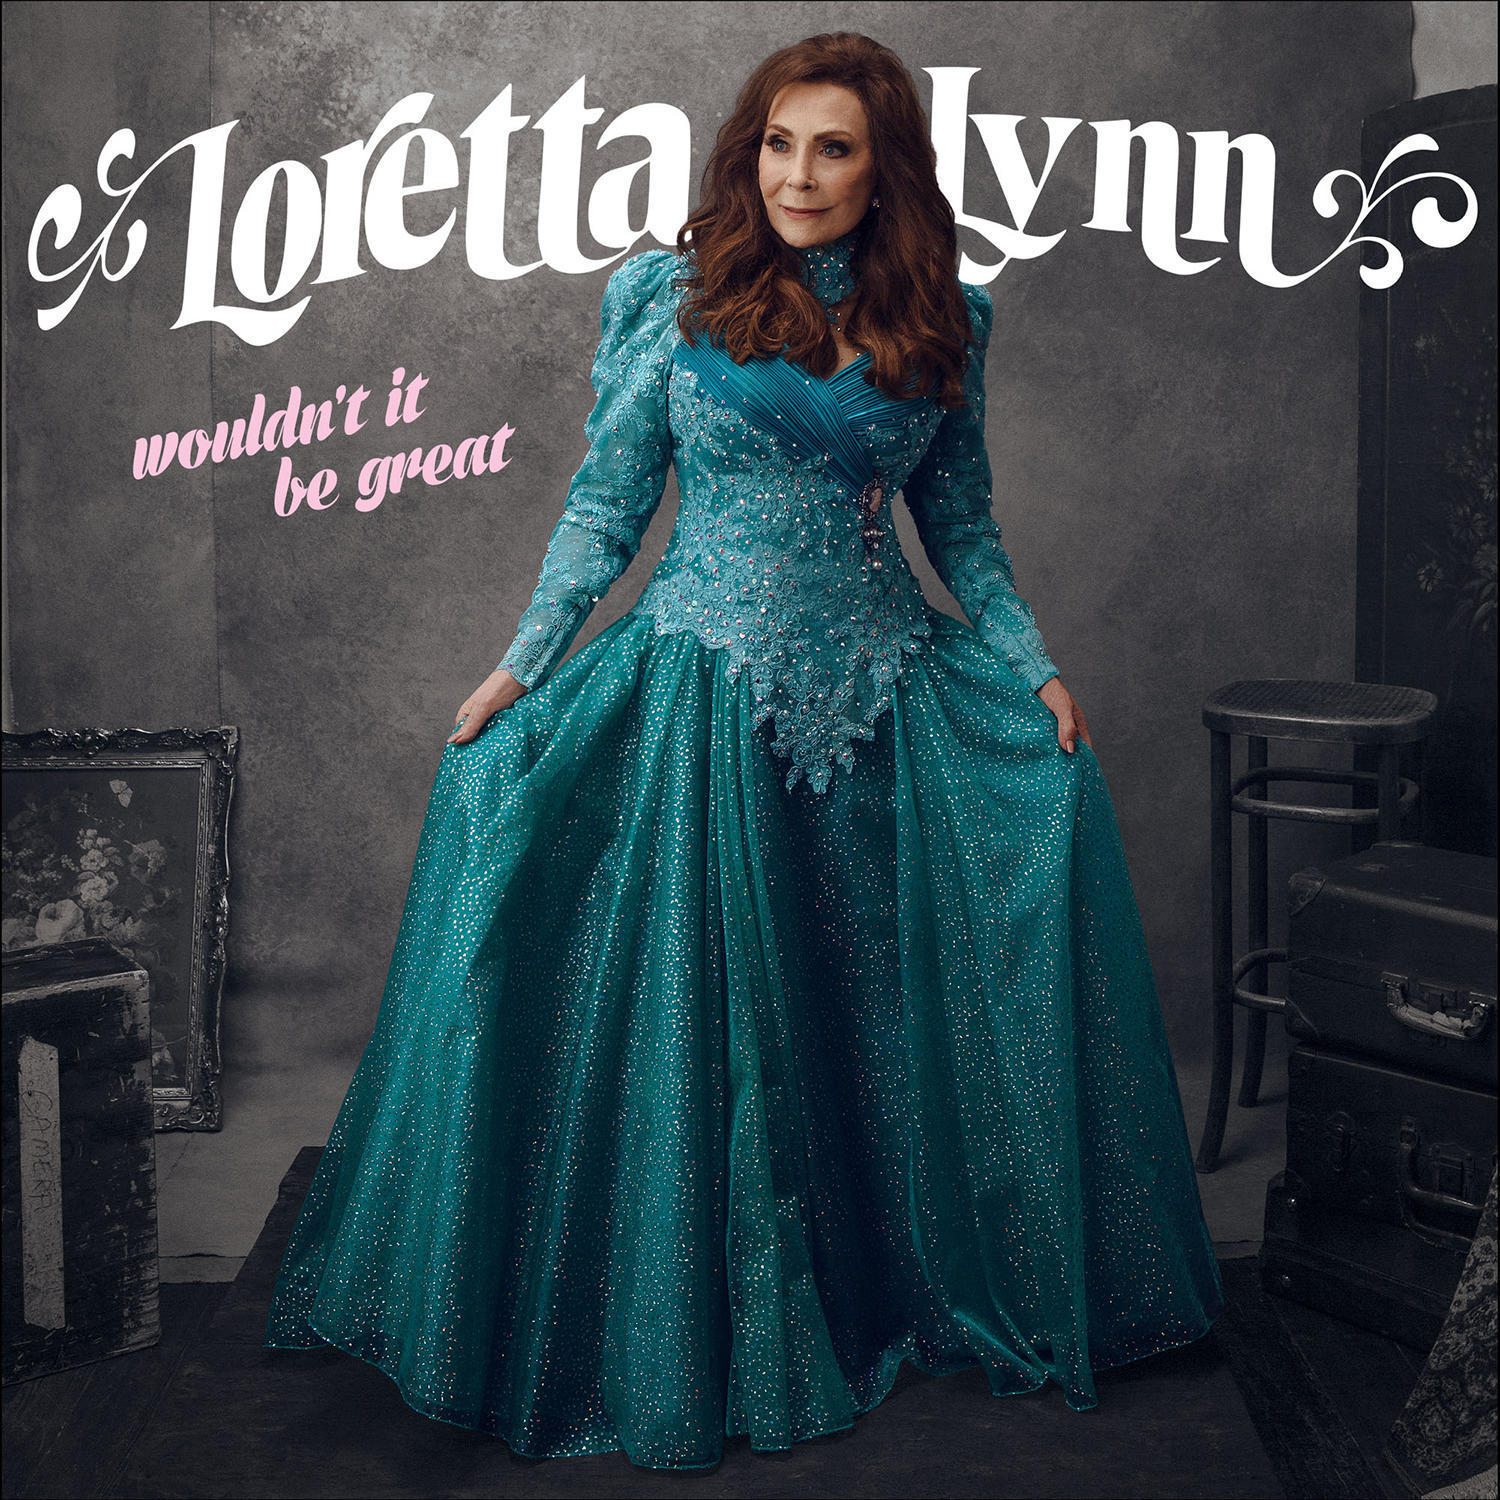 Loretta Lynn's 'Wouldn't It Be Great' Navigates The Hearth And The Honky